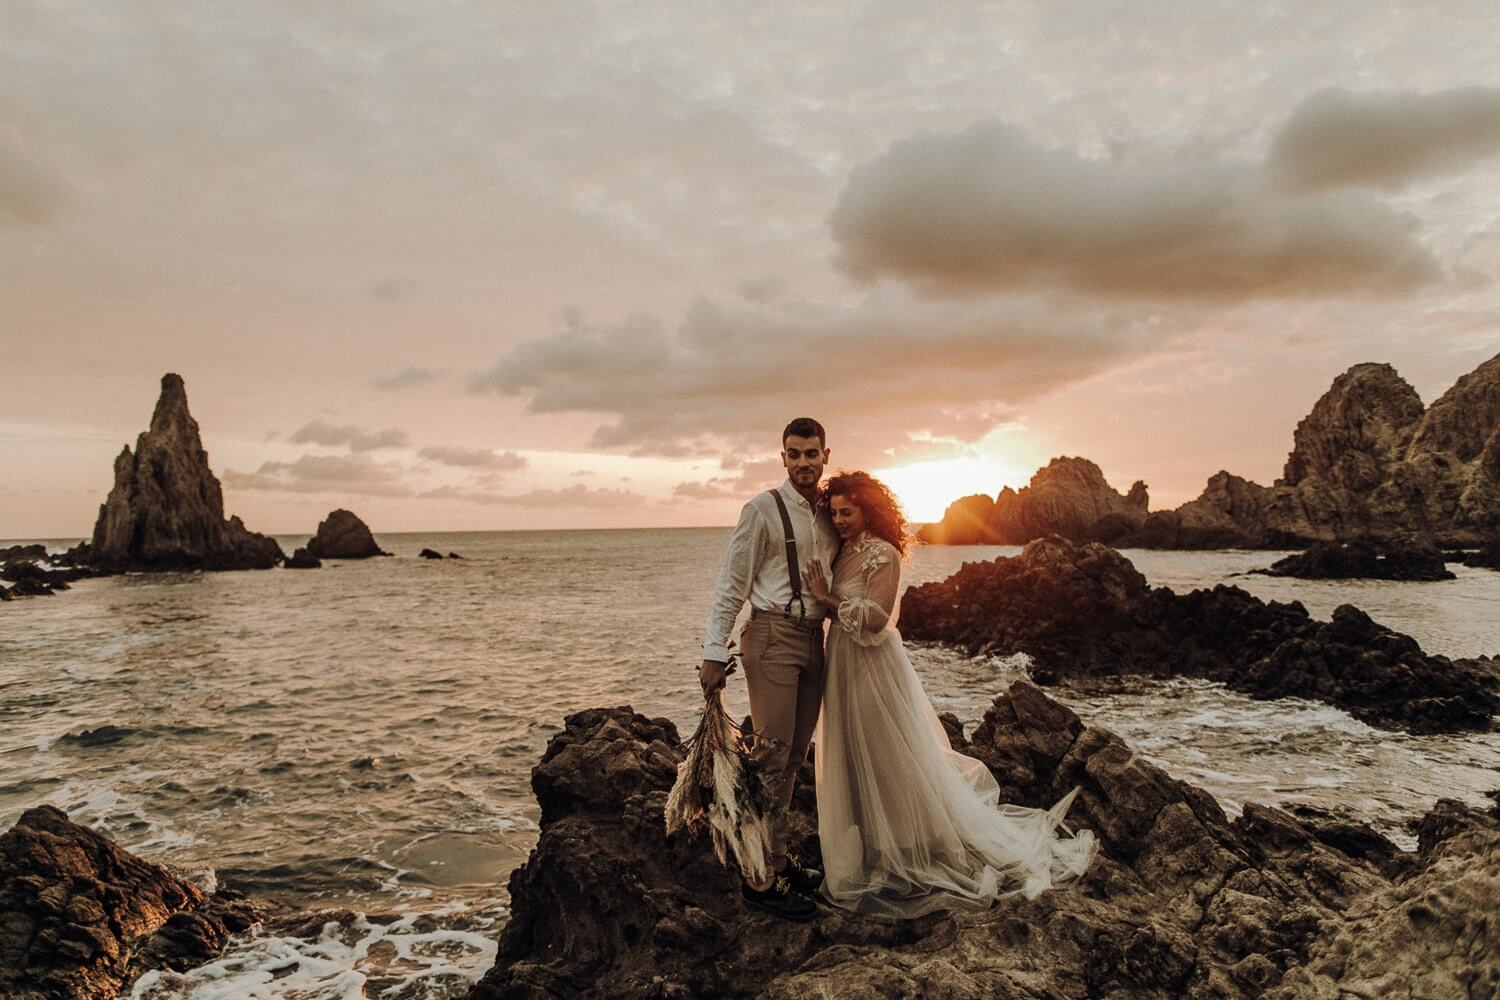 Golden Sunlight at Cabo de Gata in Andalusia. We think it could be one of the best places to get married in Spain. What do you think? #magicalmoment